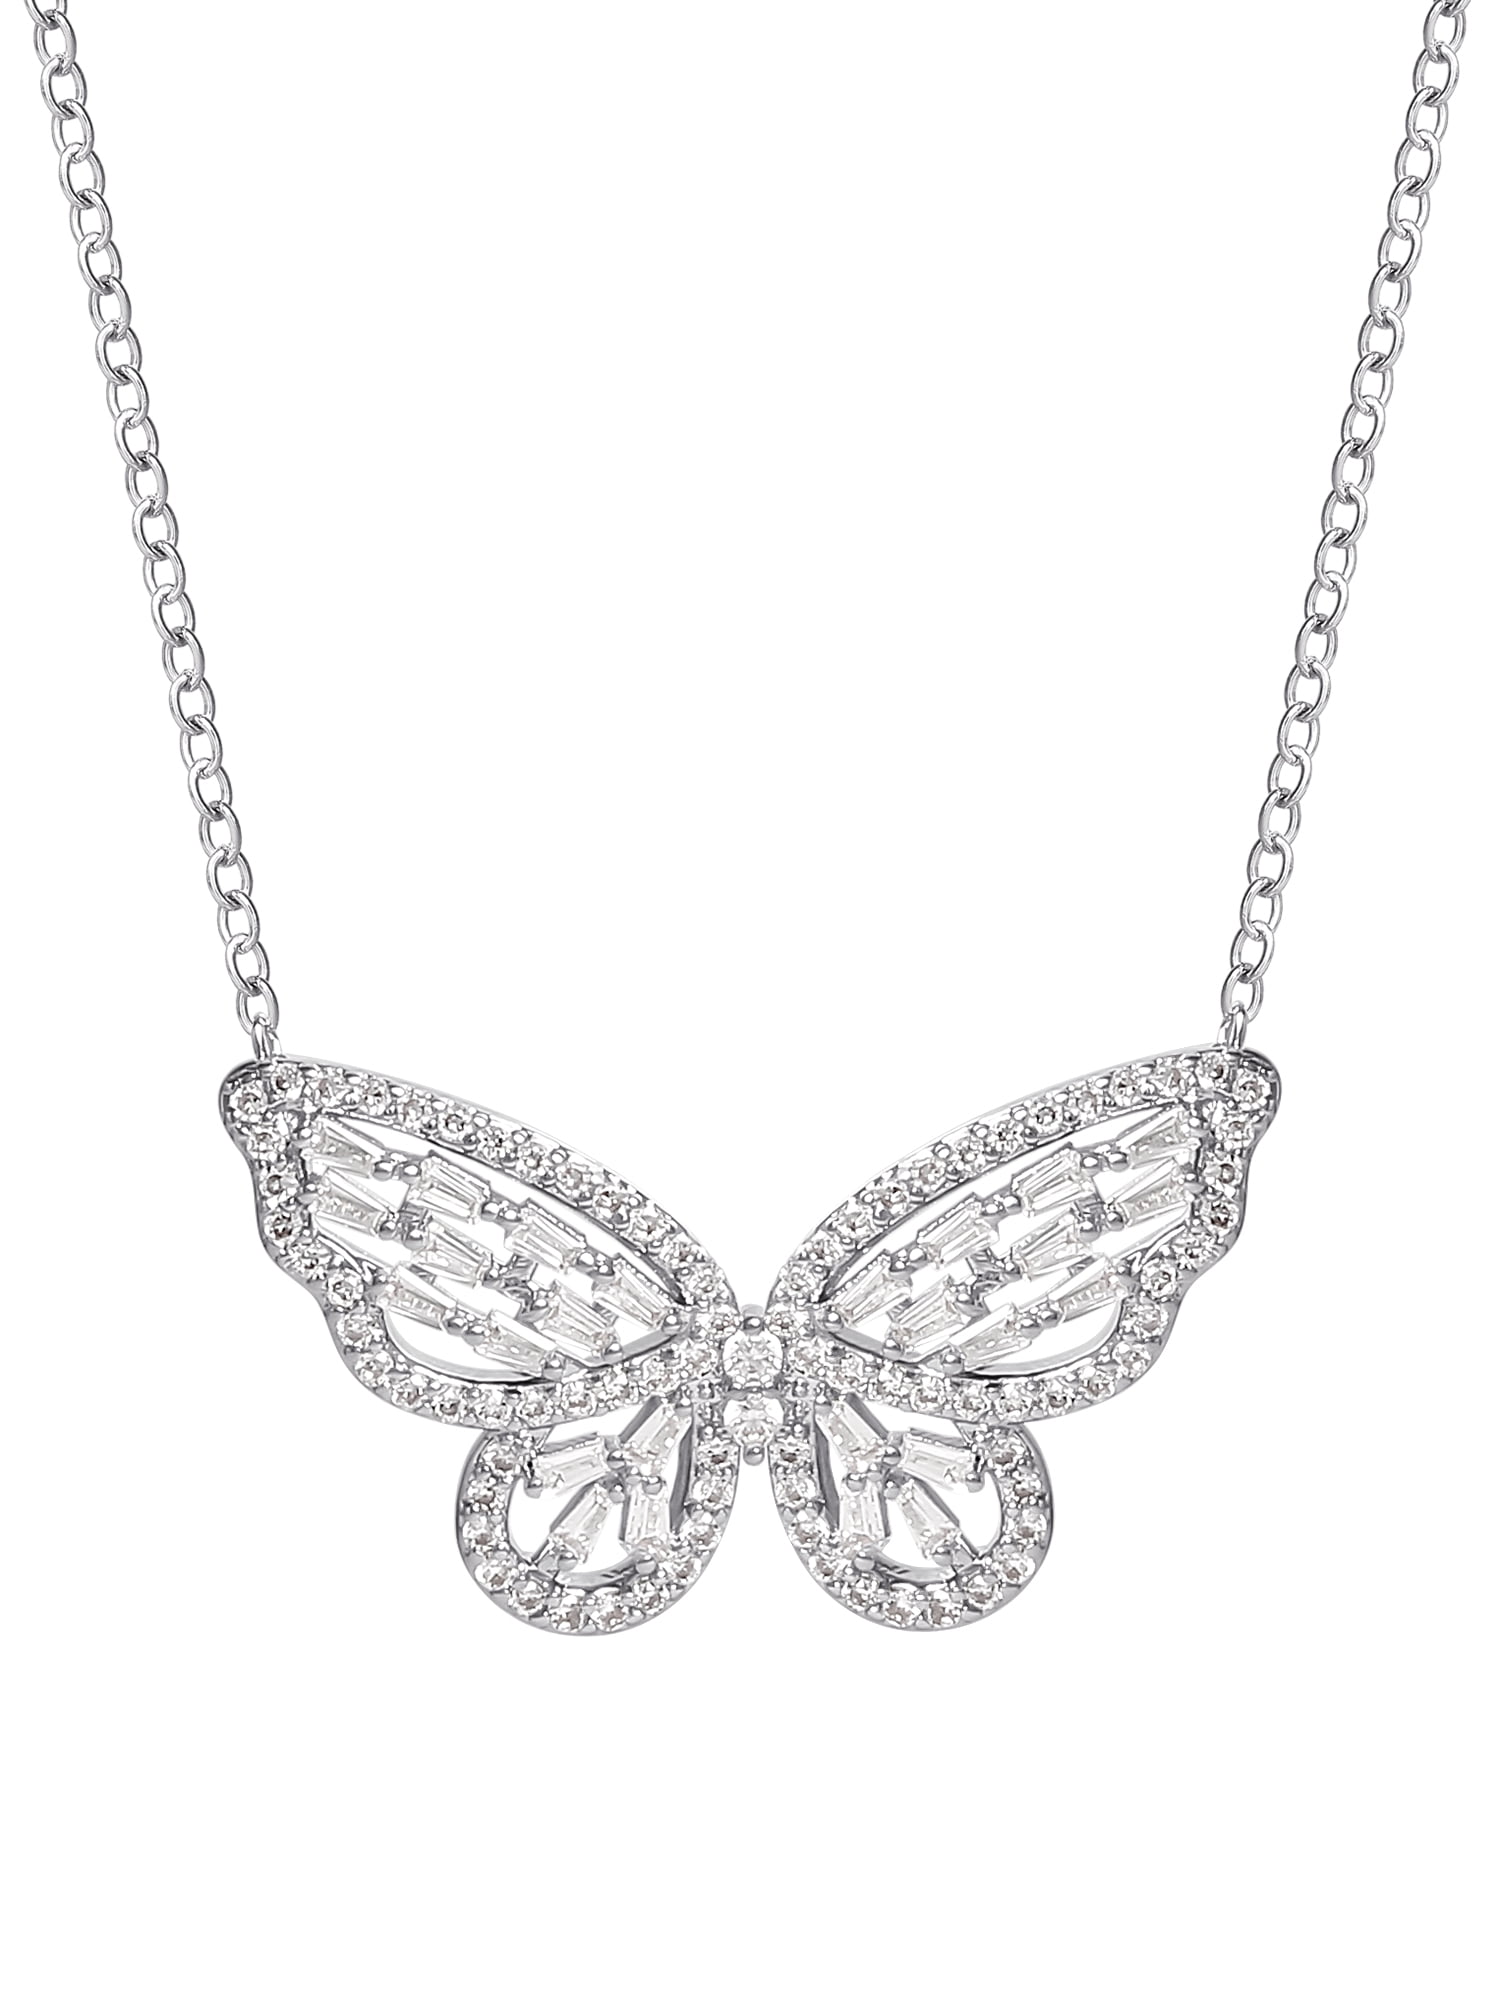 AMDXD Jewelry Women Silver Plated Pendant Necklaces Cubic Zirconia Butterfly Pearl